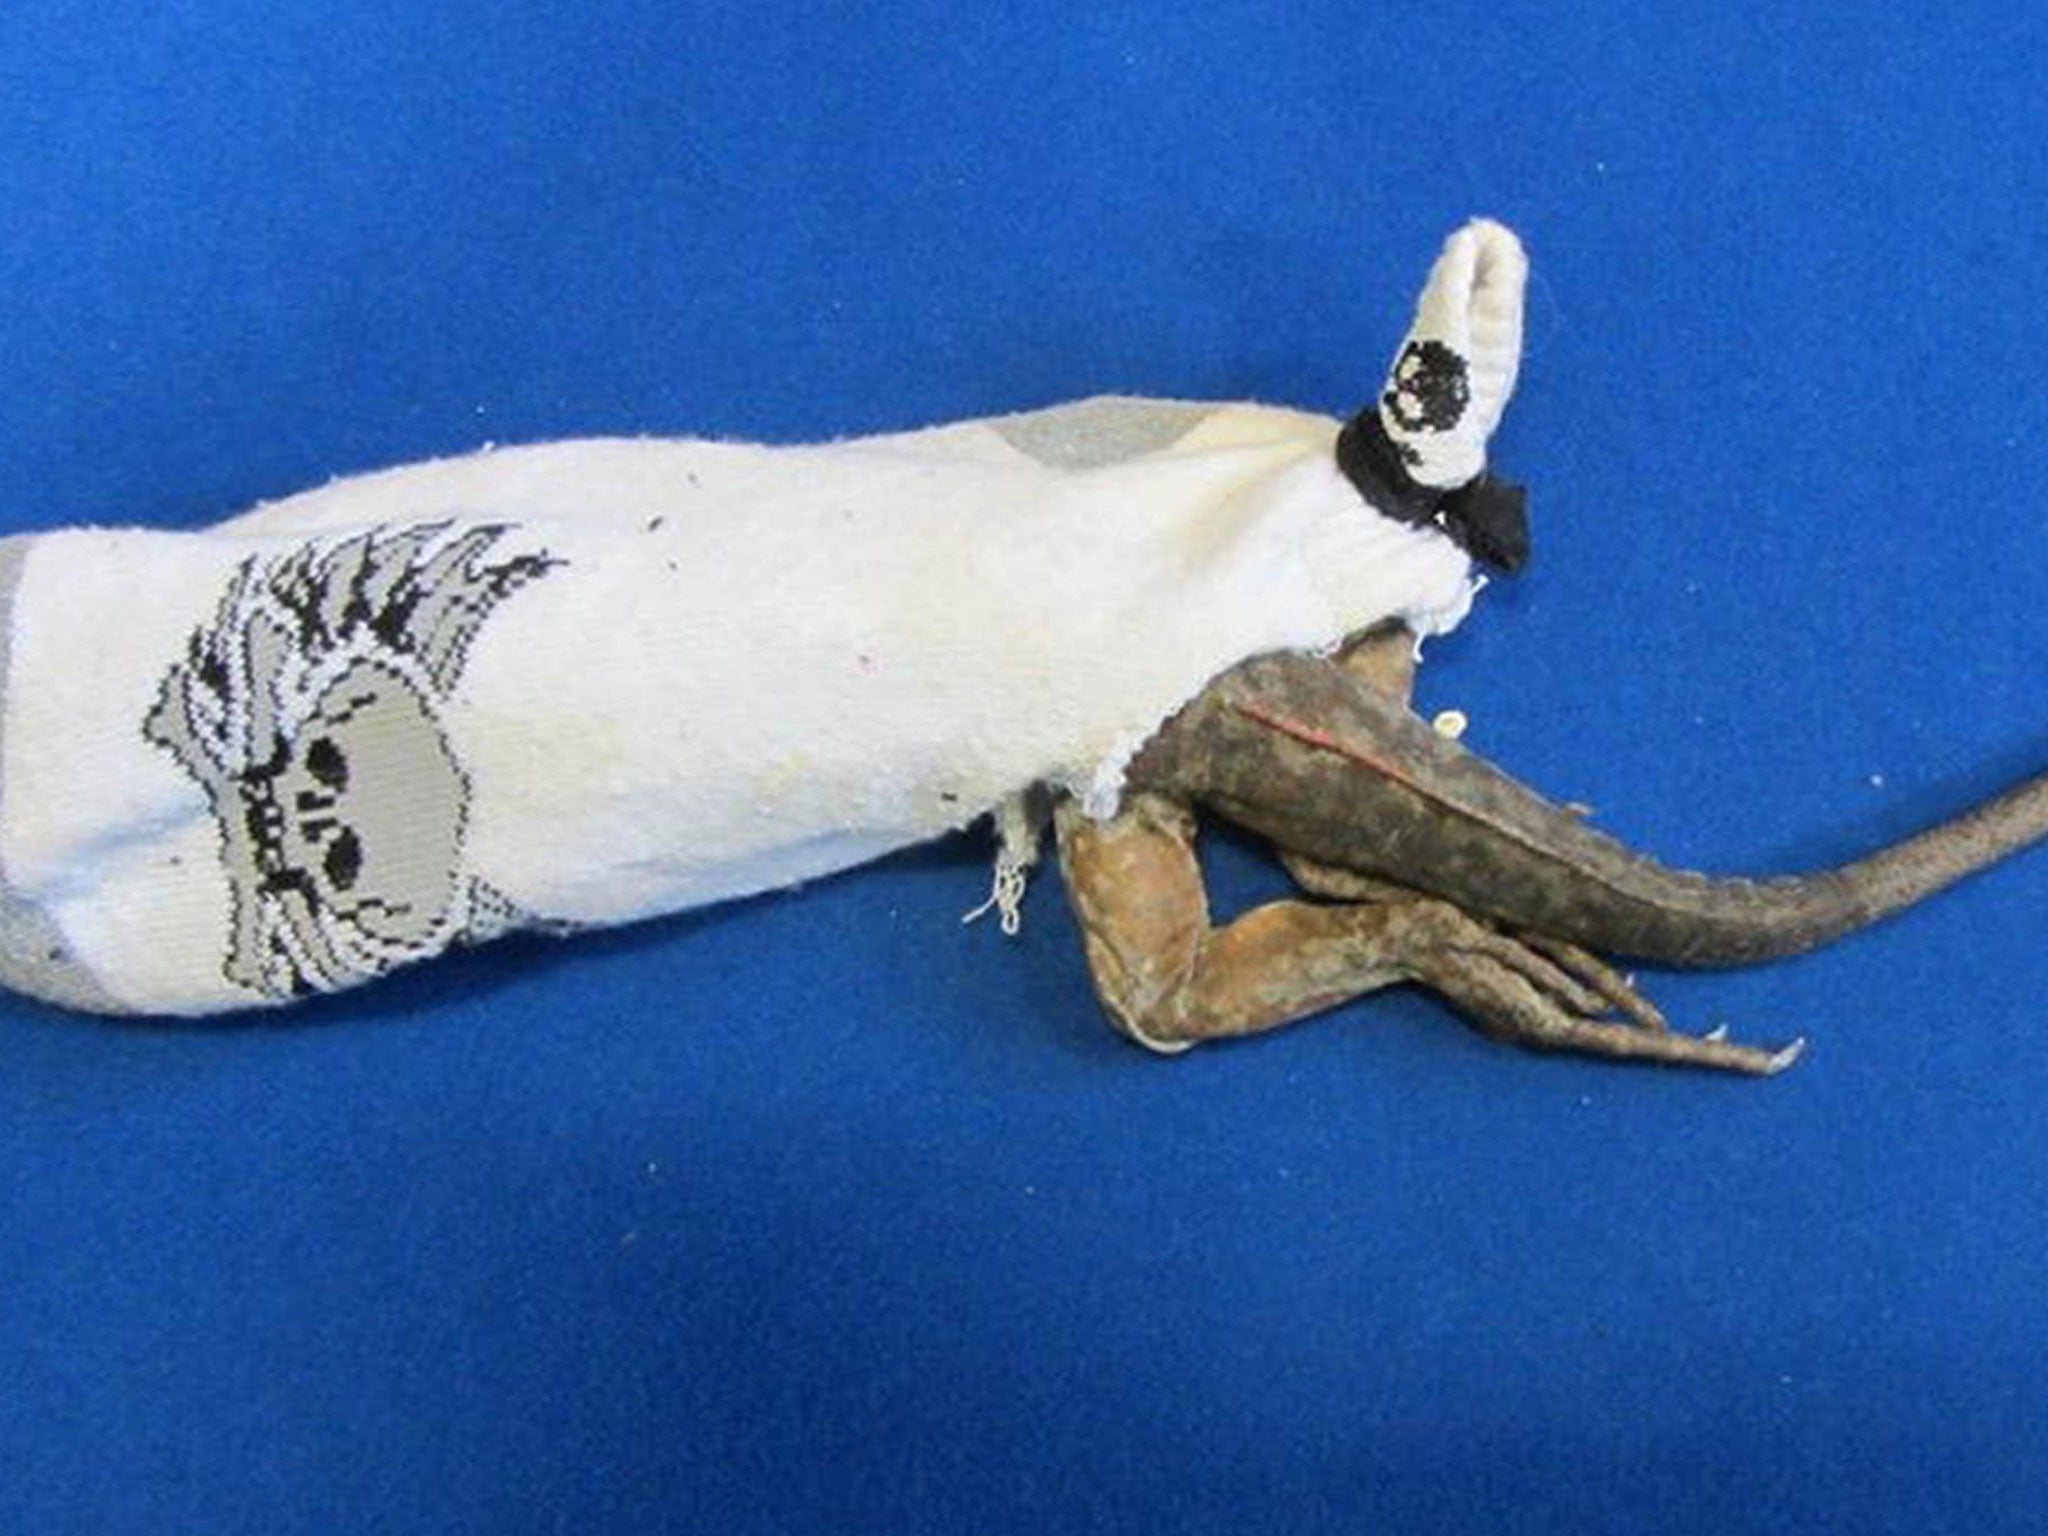 Undated handout photo issued by Border Force of one of thirteen endangered iguanas that have been seized by Border Force officers at Heathrow